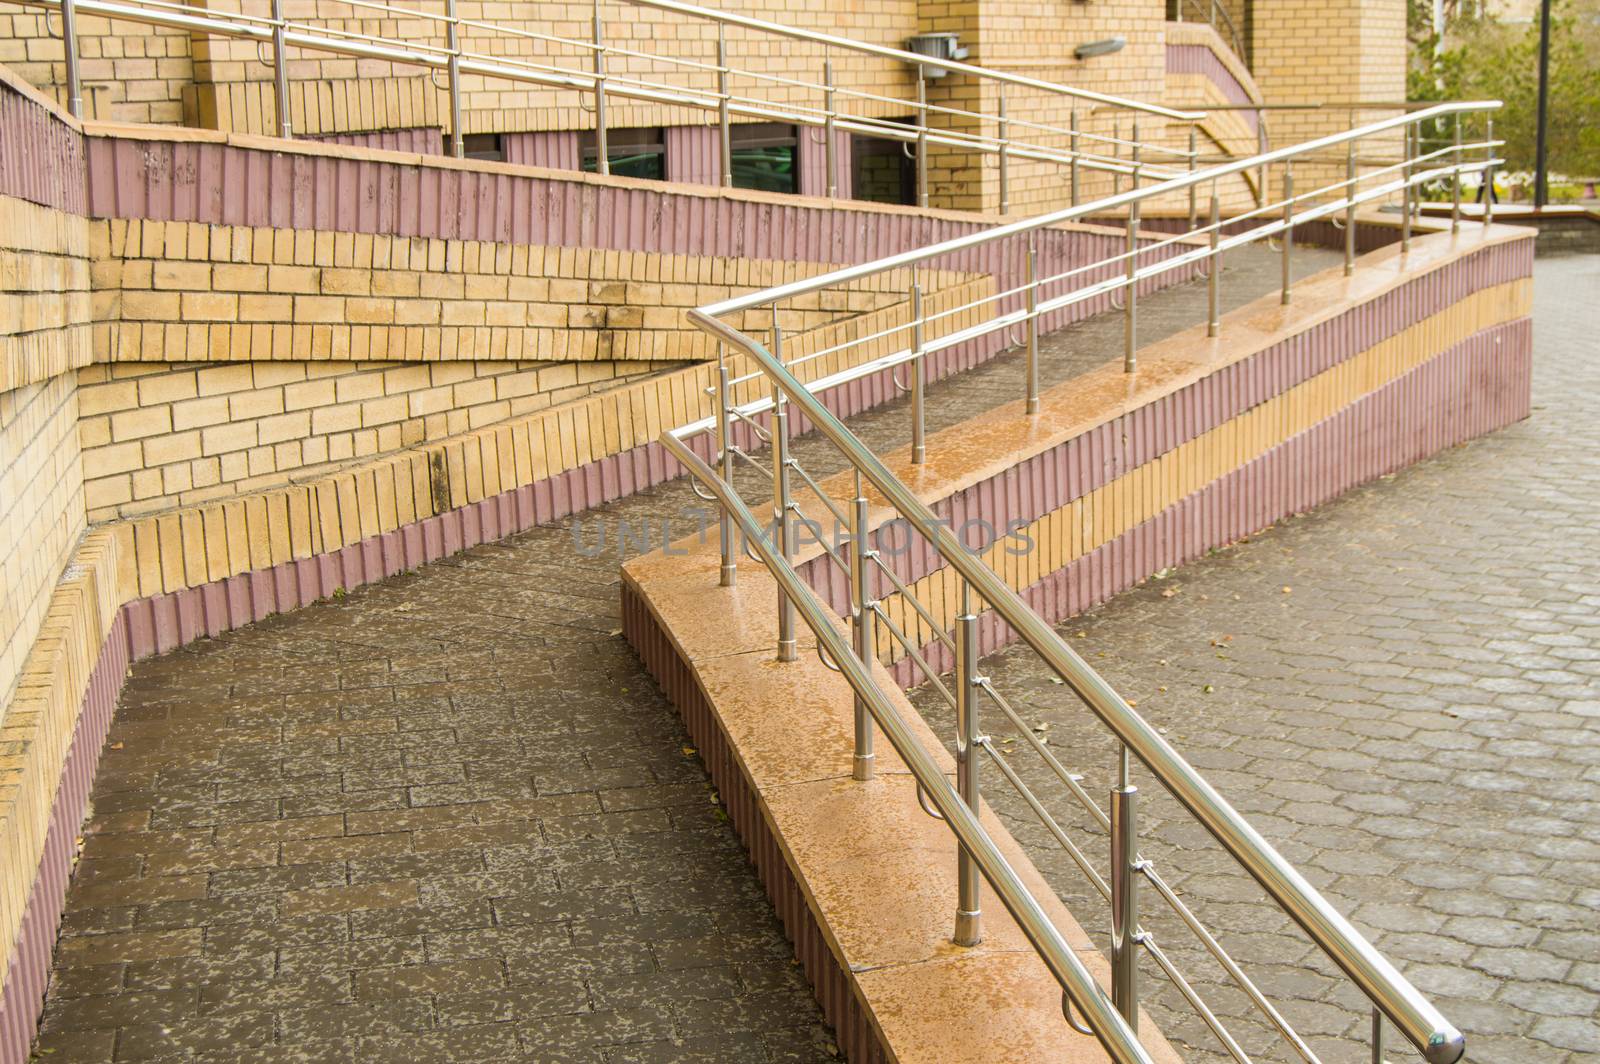 Ramp way for the movement of wheelchair users at the entrance to the building.